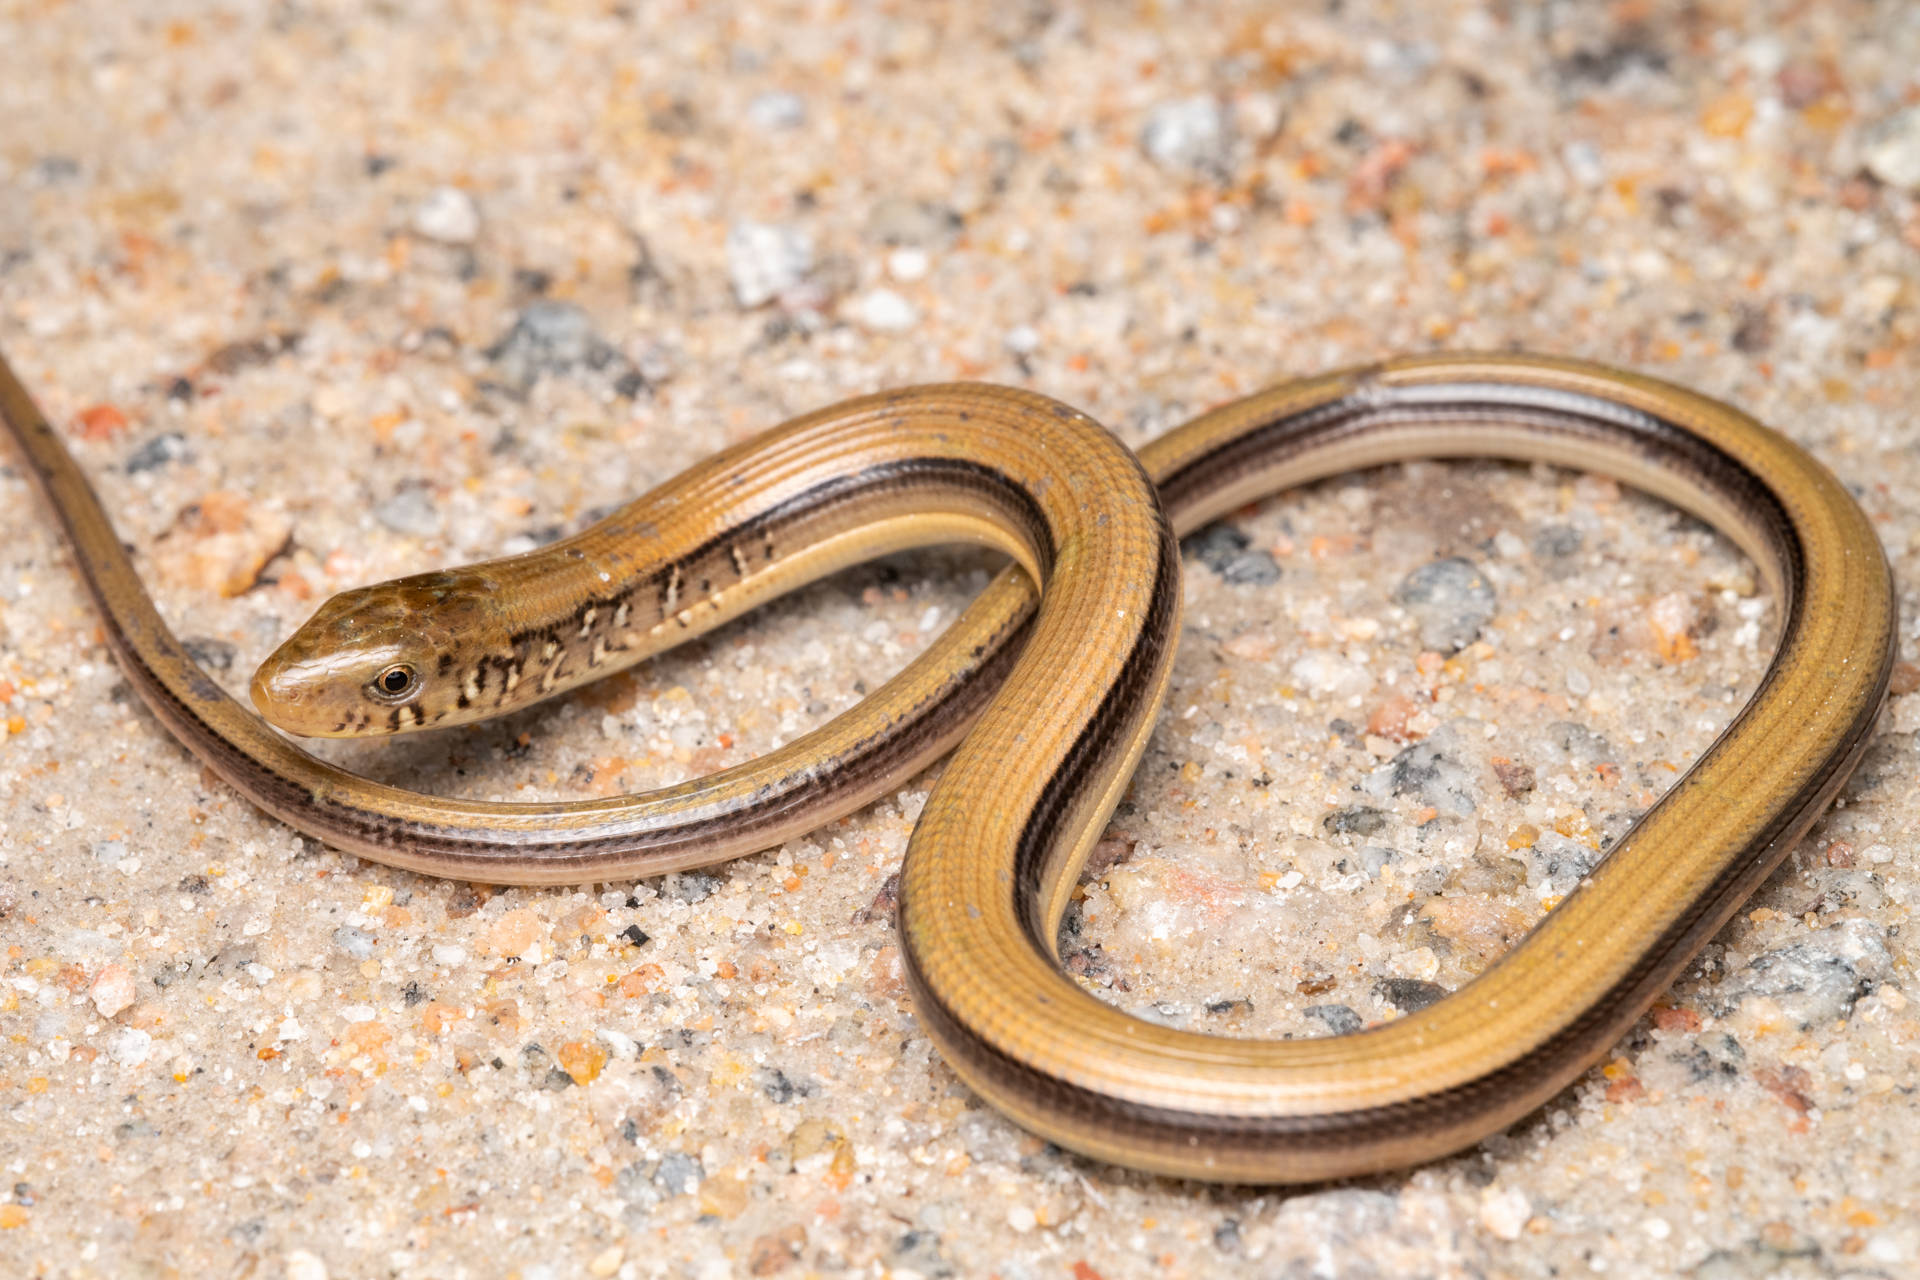 Eastern Glass Lizard On Pebbly Surface Wallpaper